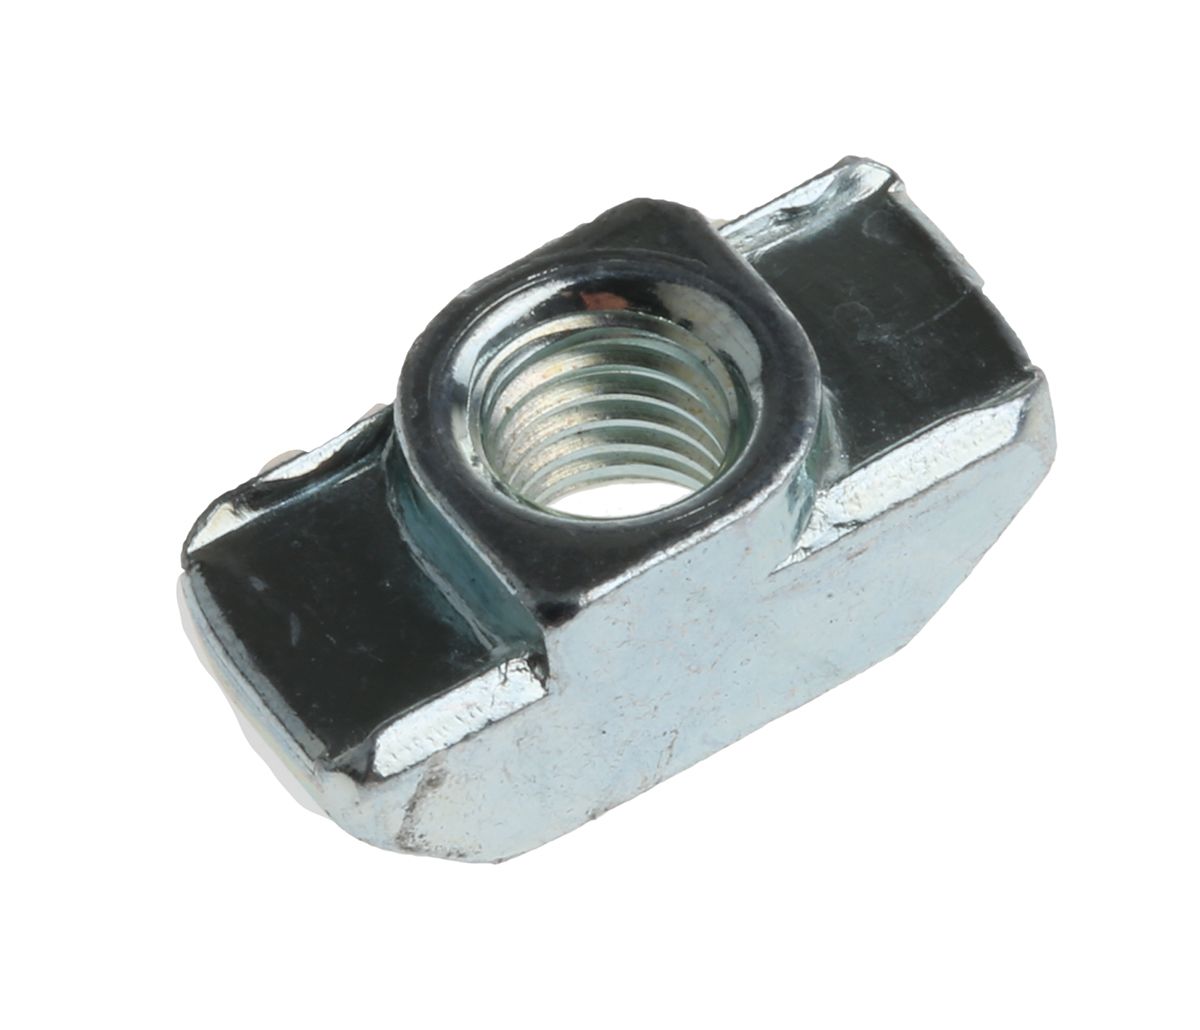 Bosch Rexroth T-Slot Nut Connecting Component, strut profile 40 mm, 45 mm, 50 mm, 60 mm, groove Size 10mm